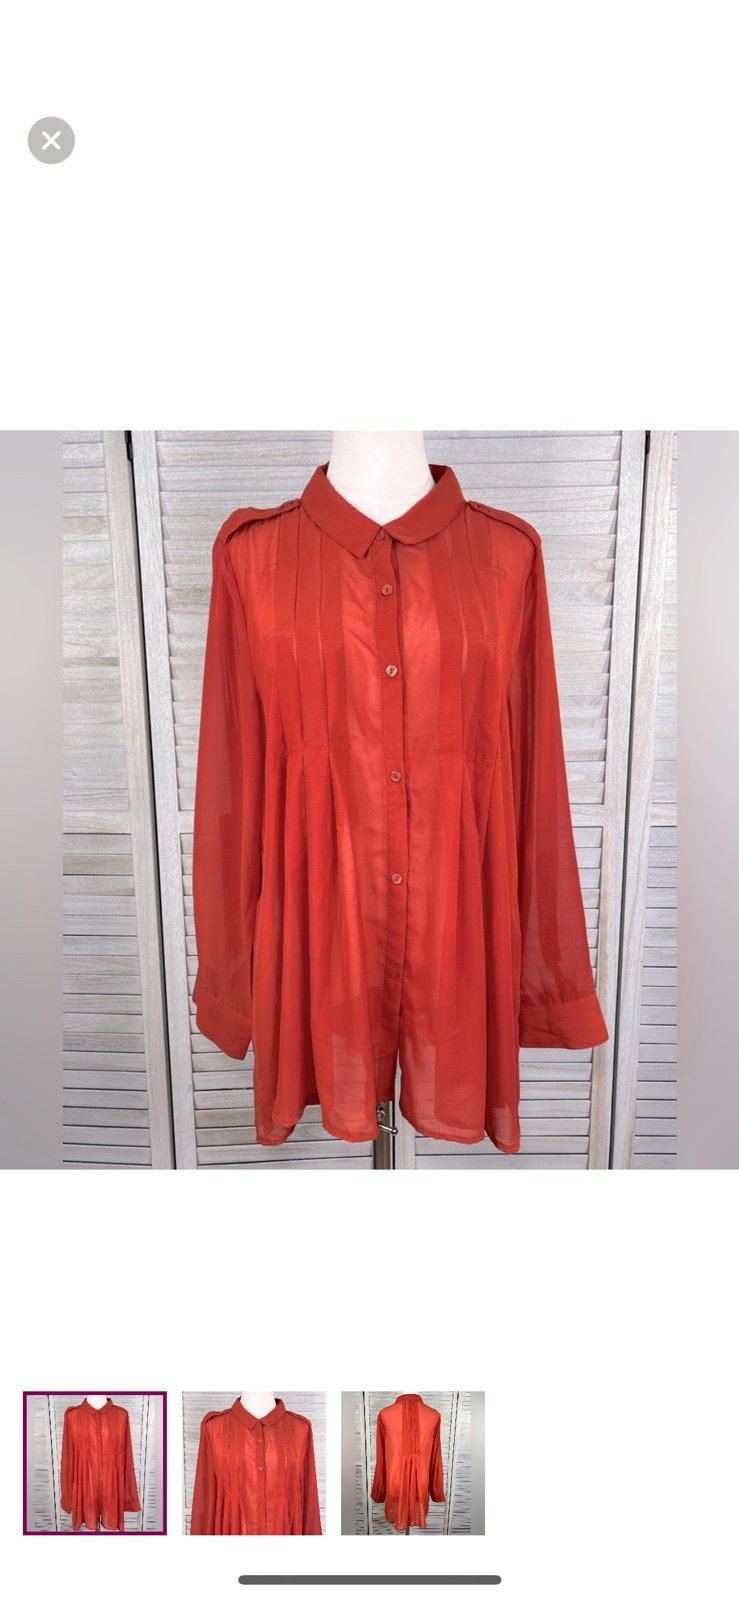 SIMPLY NOELLE Oversized Sheer Pleated Button Down Shirt Rust-L/XL (12-14) OWWJPCYcW